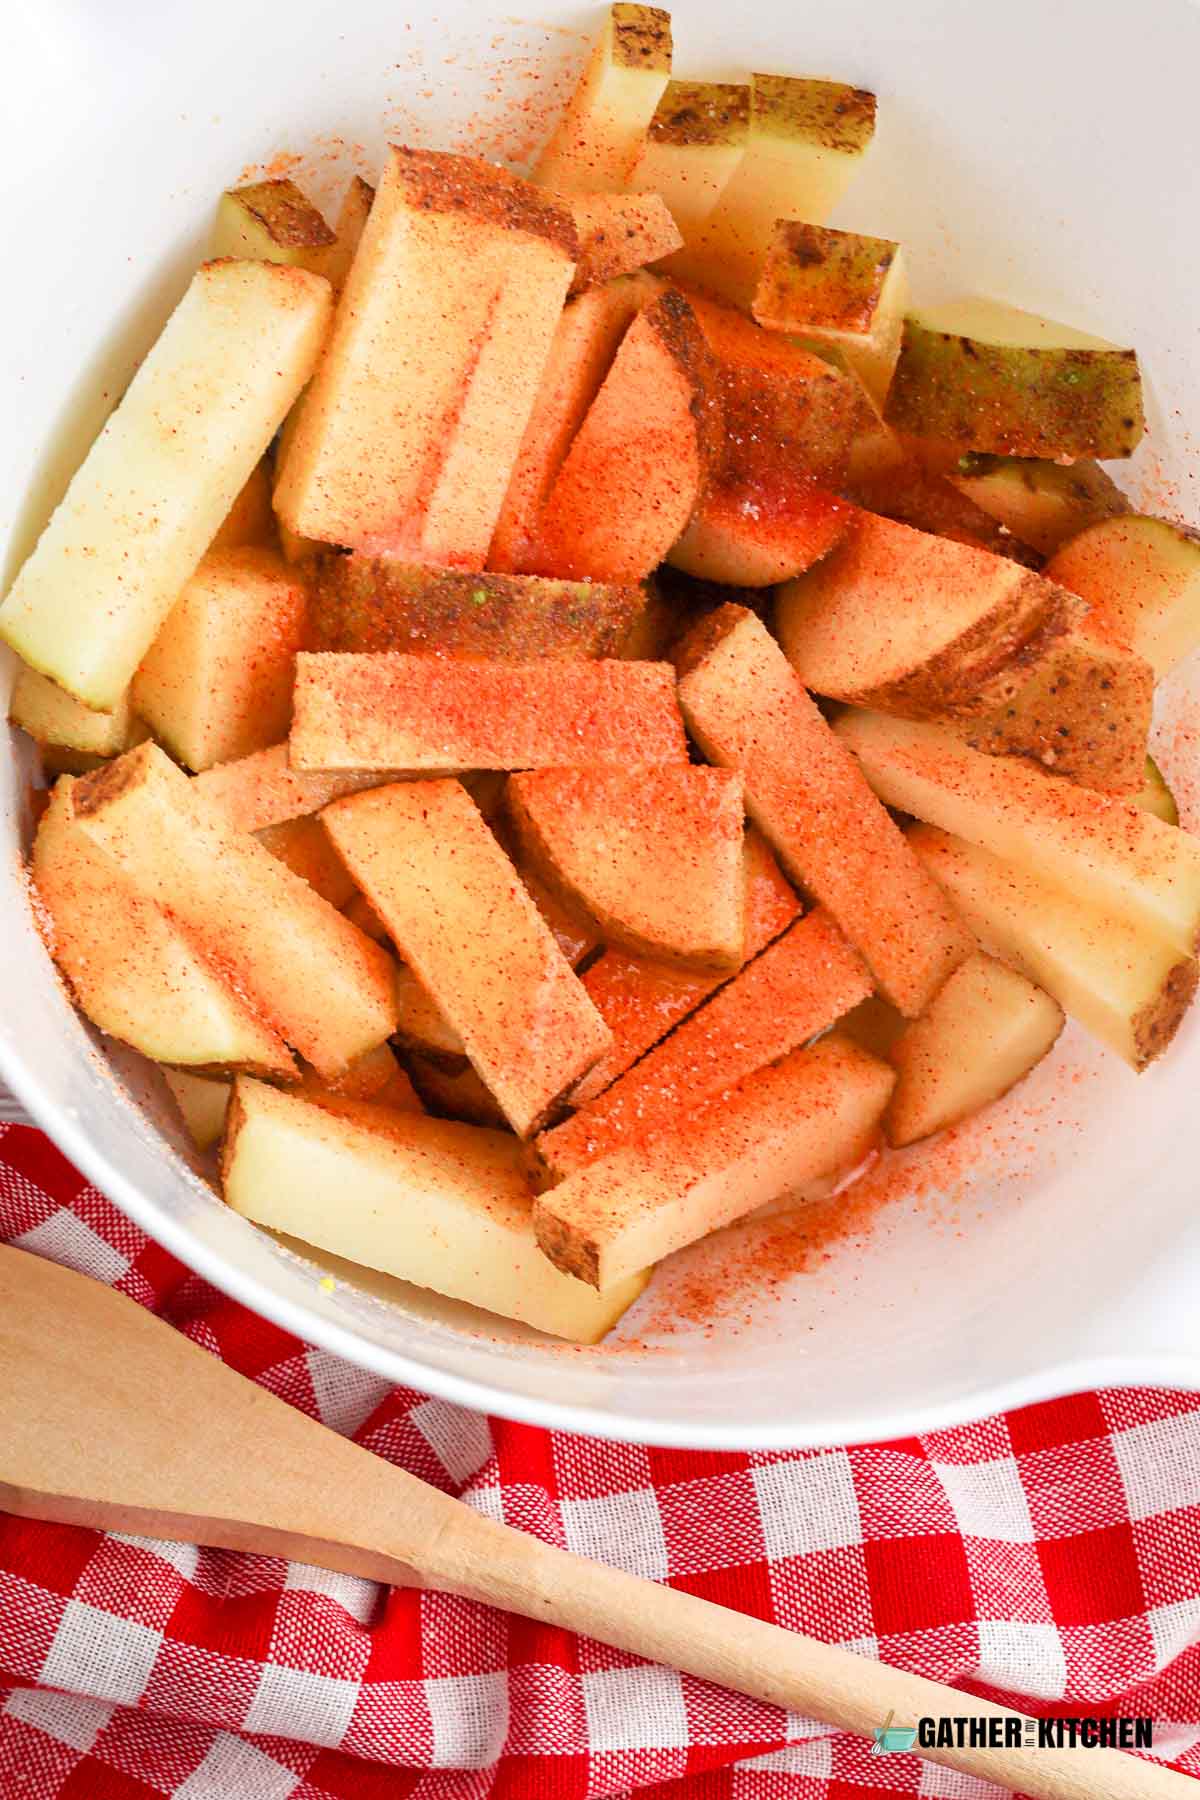 Cut up potatoes in a bowl with seasoning on top.